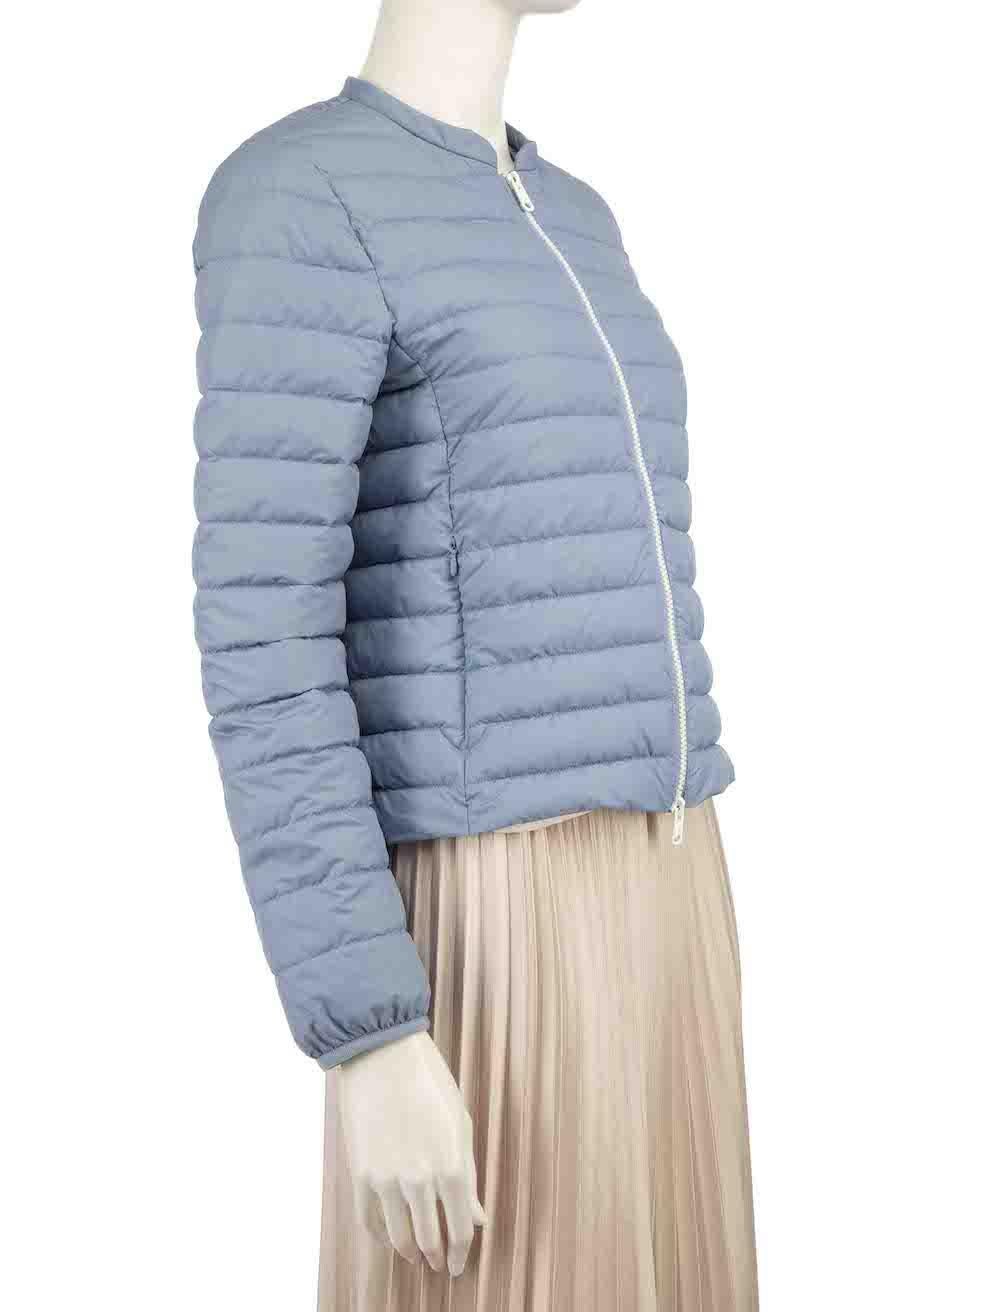 CONDITION is Very good. Hardly any visible wear to jacket is evident on this used Ecoalf designer resale item.
 
 
 
 Details
 
 
 Blue
 
 Recycled polyester
 
 Down jacket
 
 Quilted
 
 Zip fastening
 
 Round neck
 
 2x Side pockets
 
 2x Internal